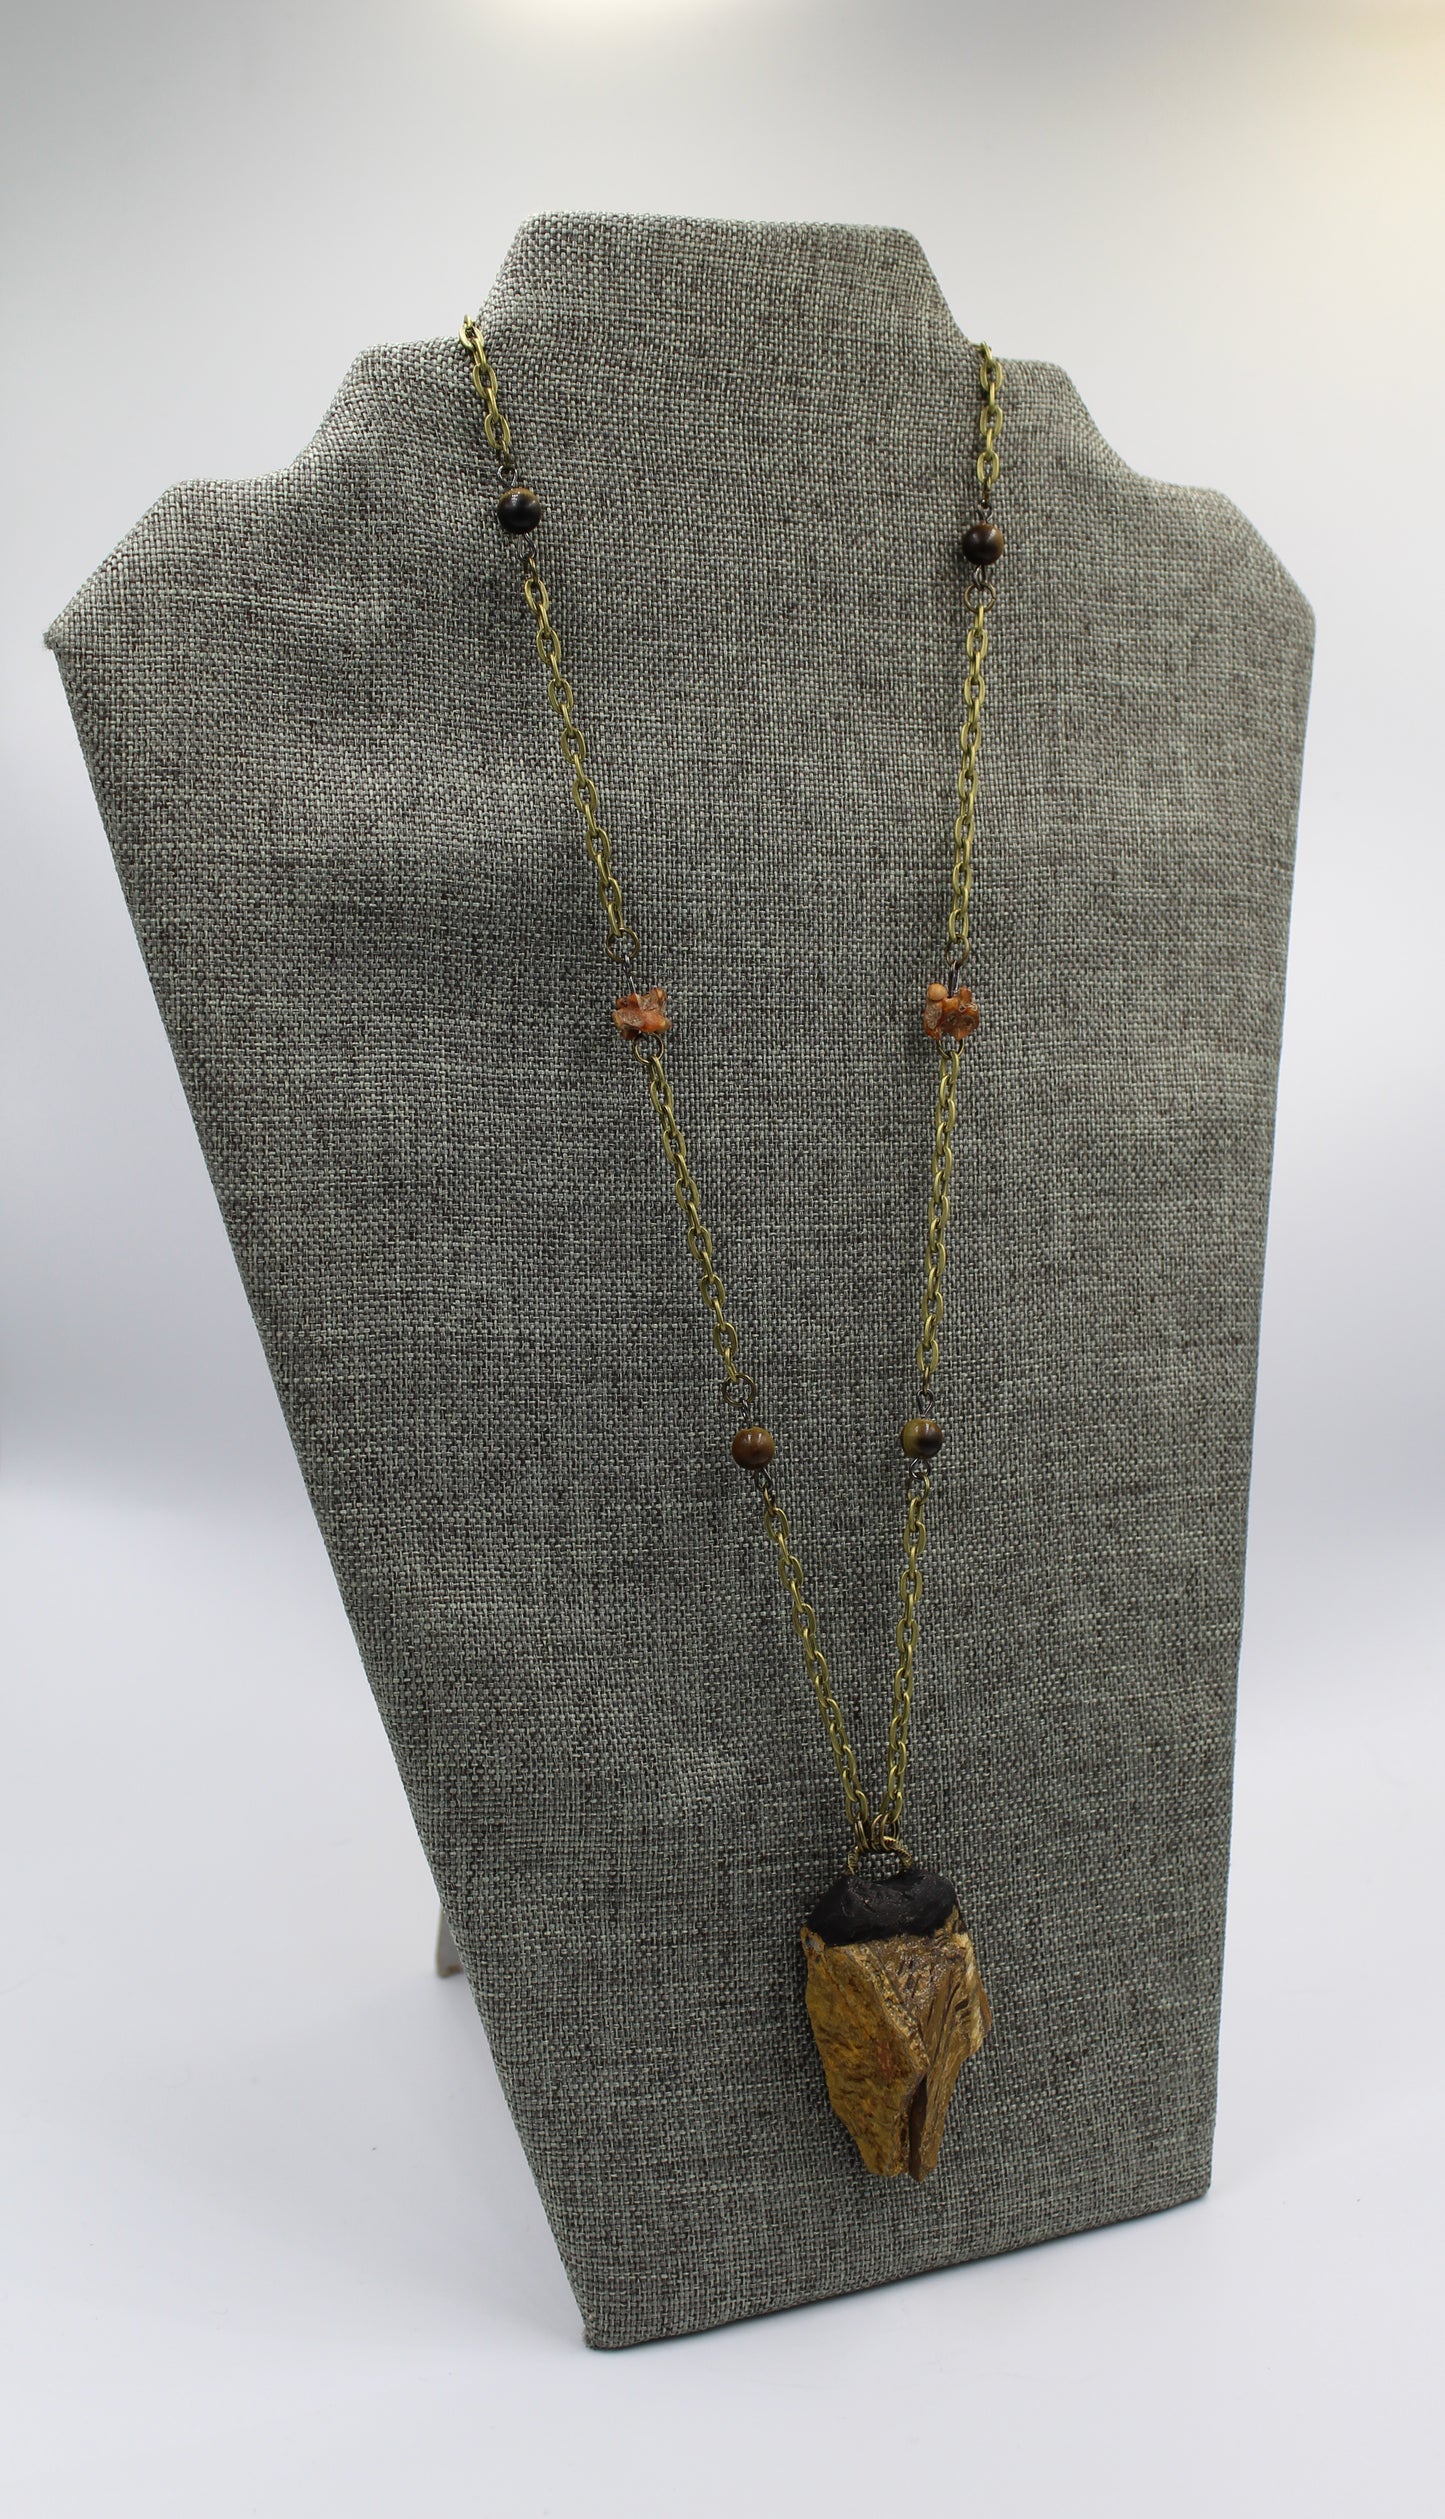 Hekas Creative: Tigers eye pendant with 6mm tigers eye beads and unbleached snake vertebrae